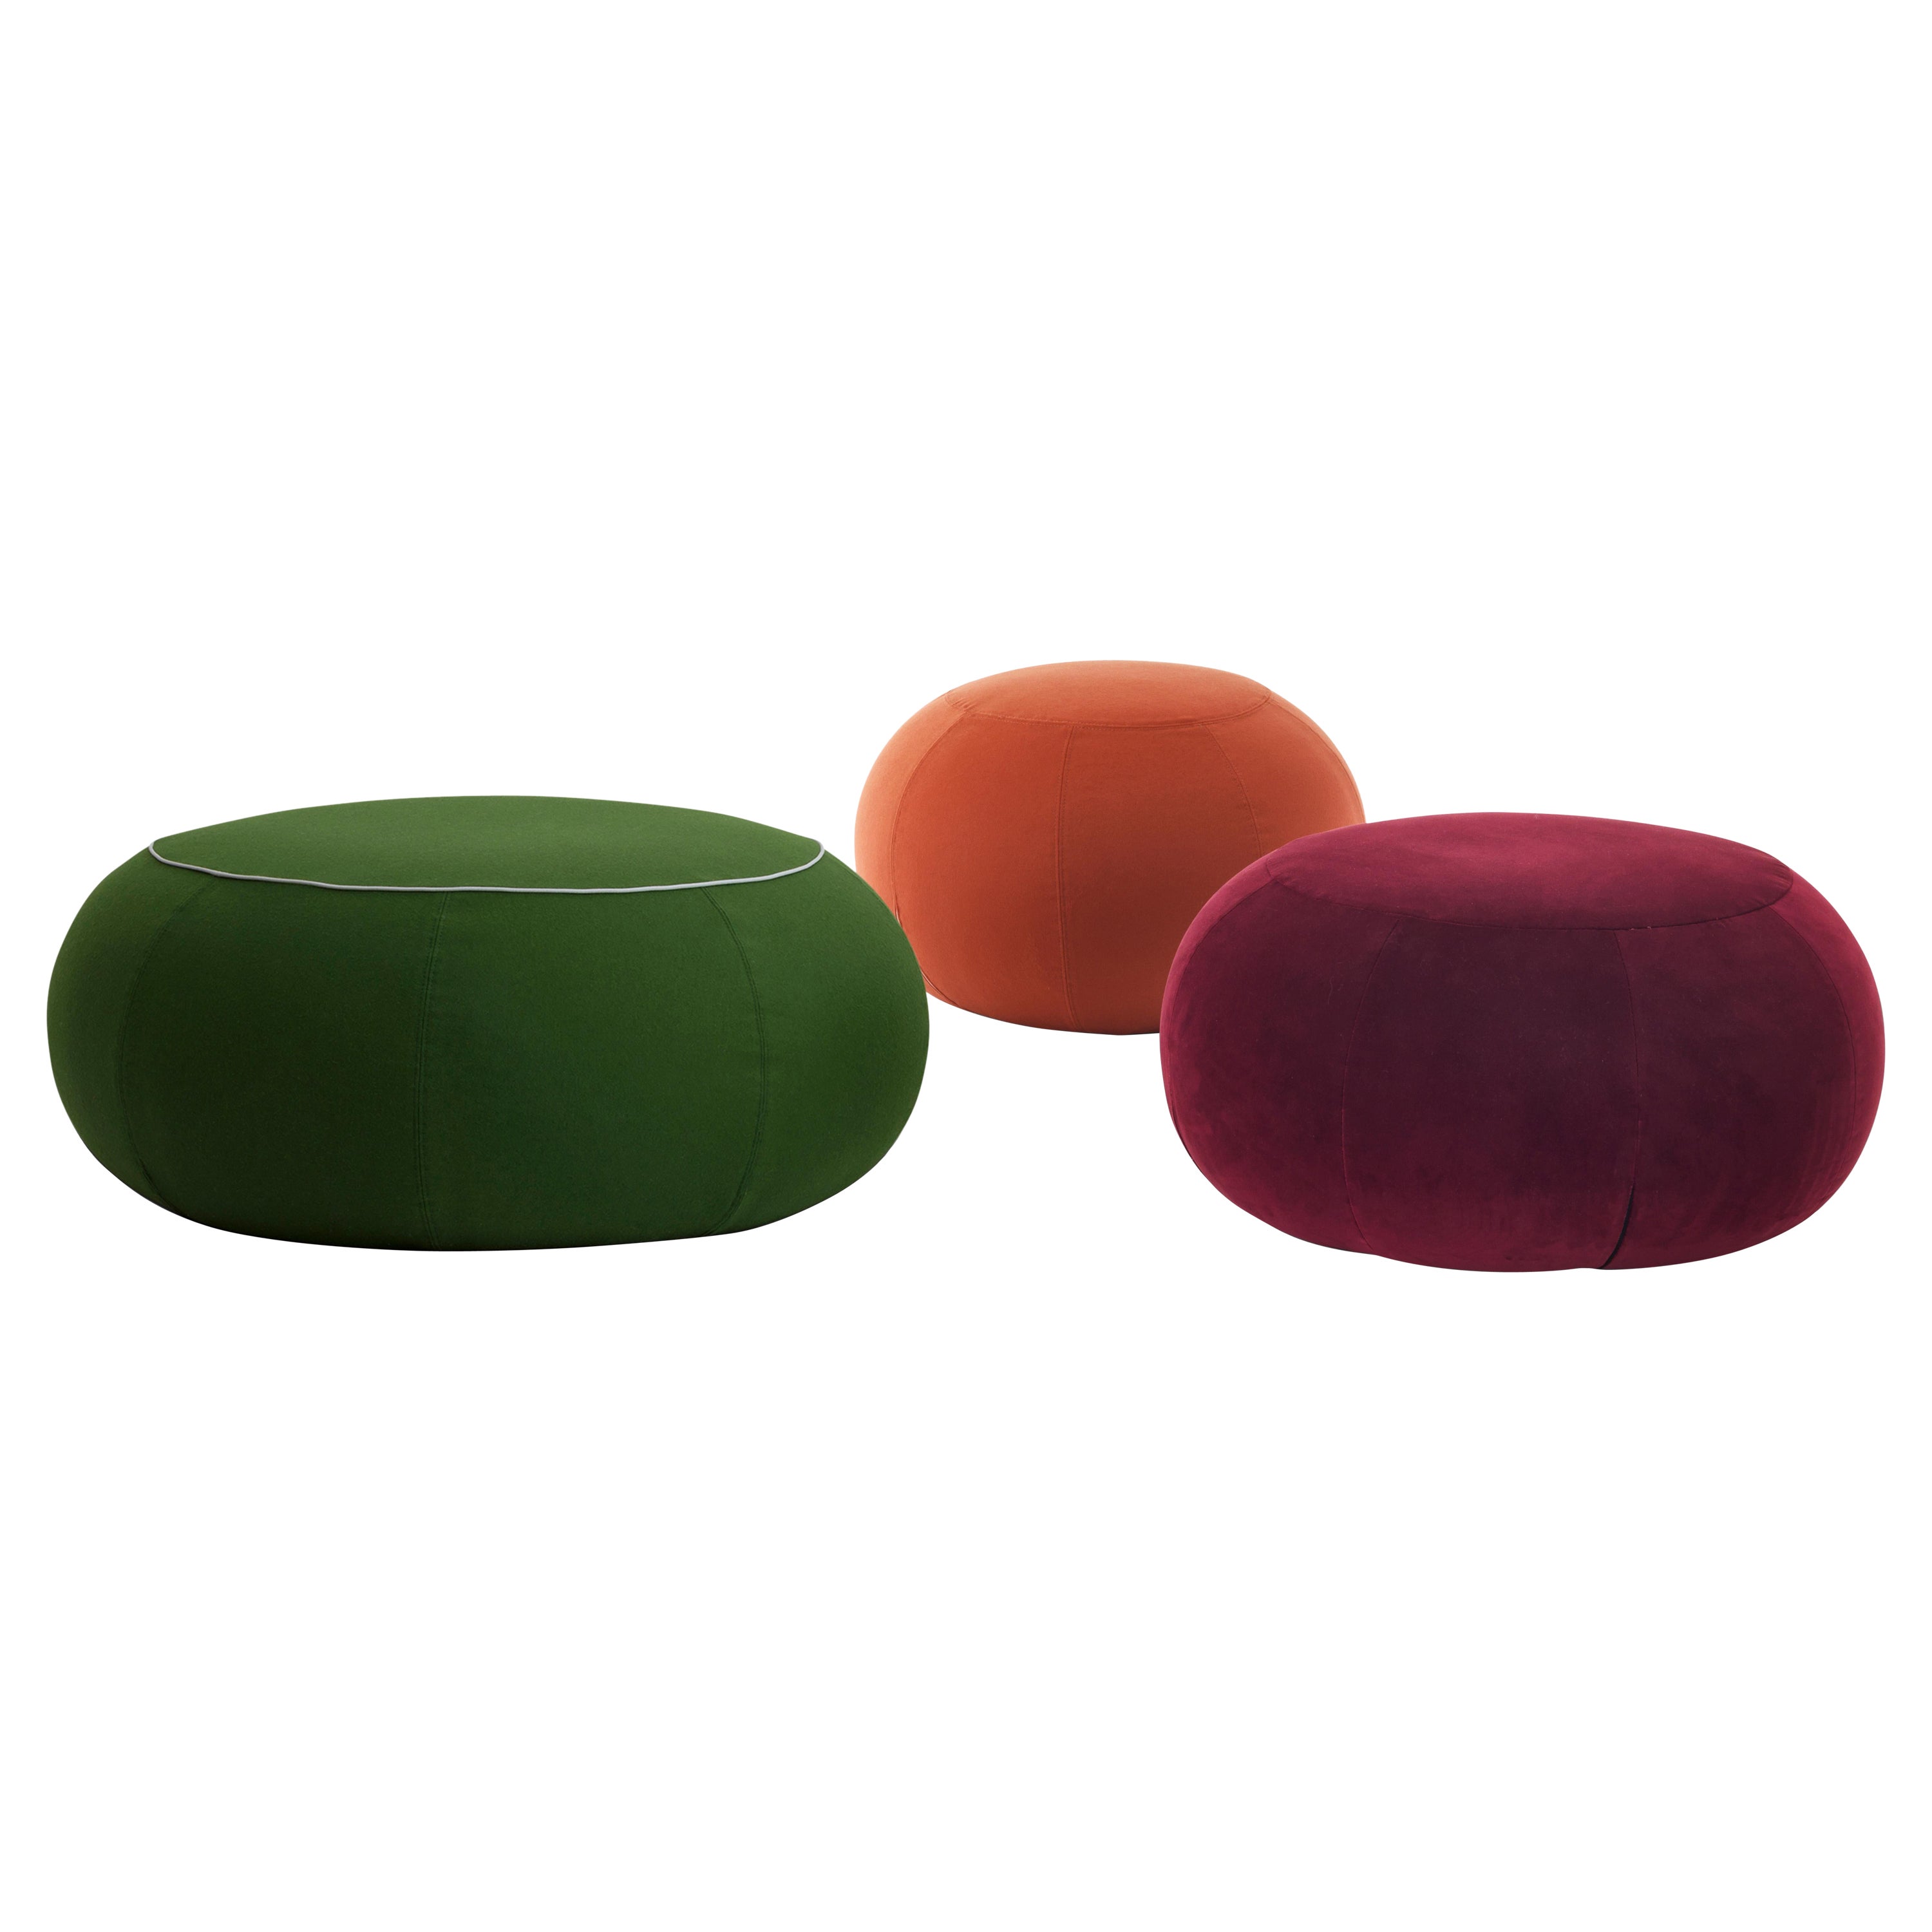 Geo Medium Pouf in Vip Sweet Velvet Pink Upholstery by Paolo Grasselli